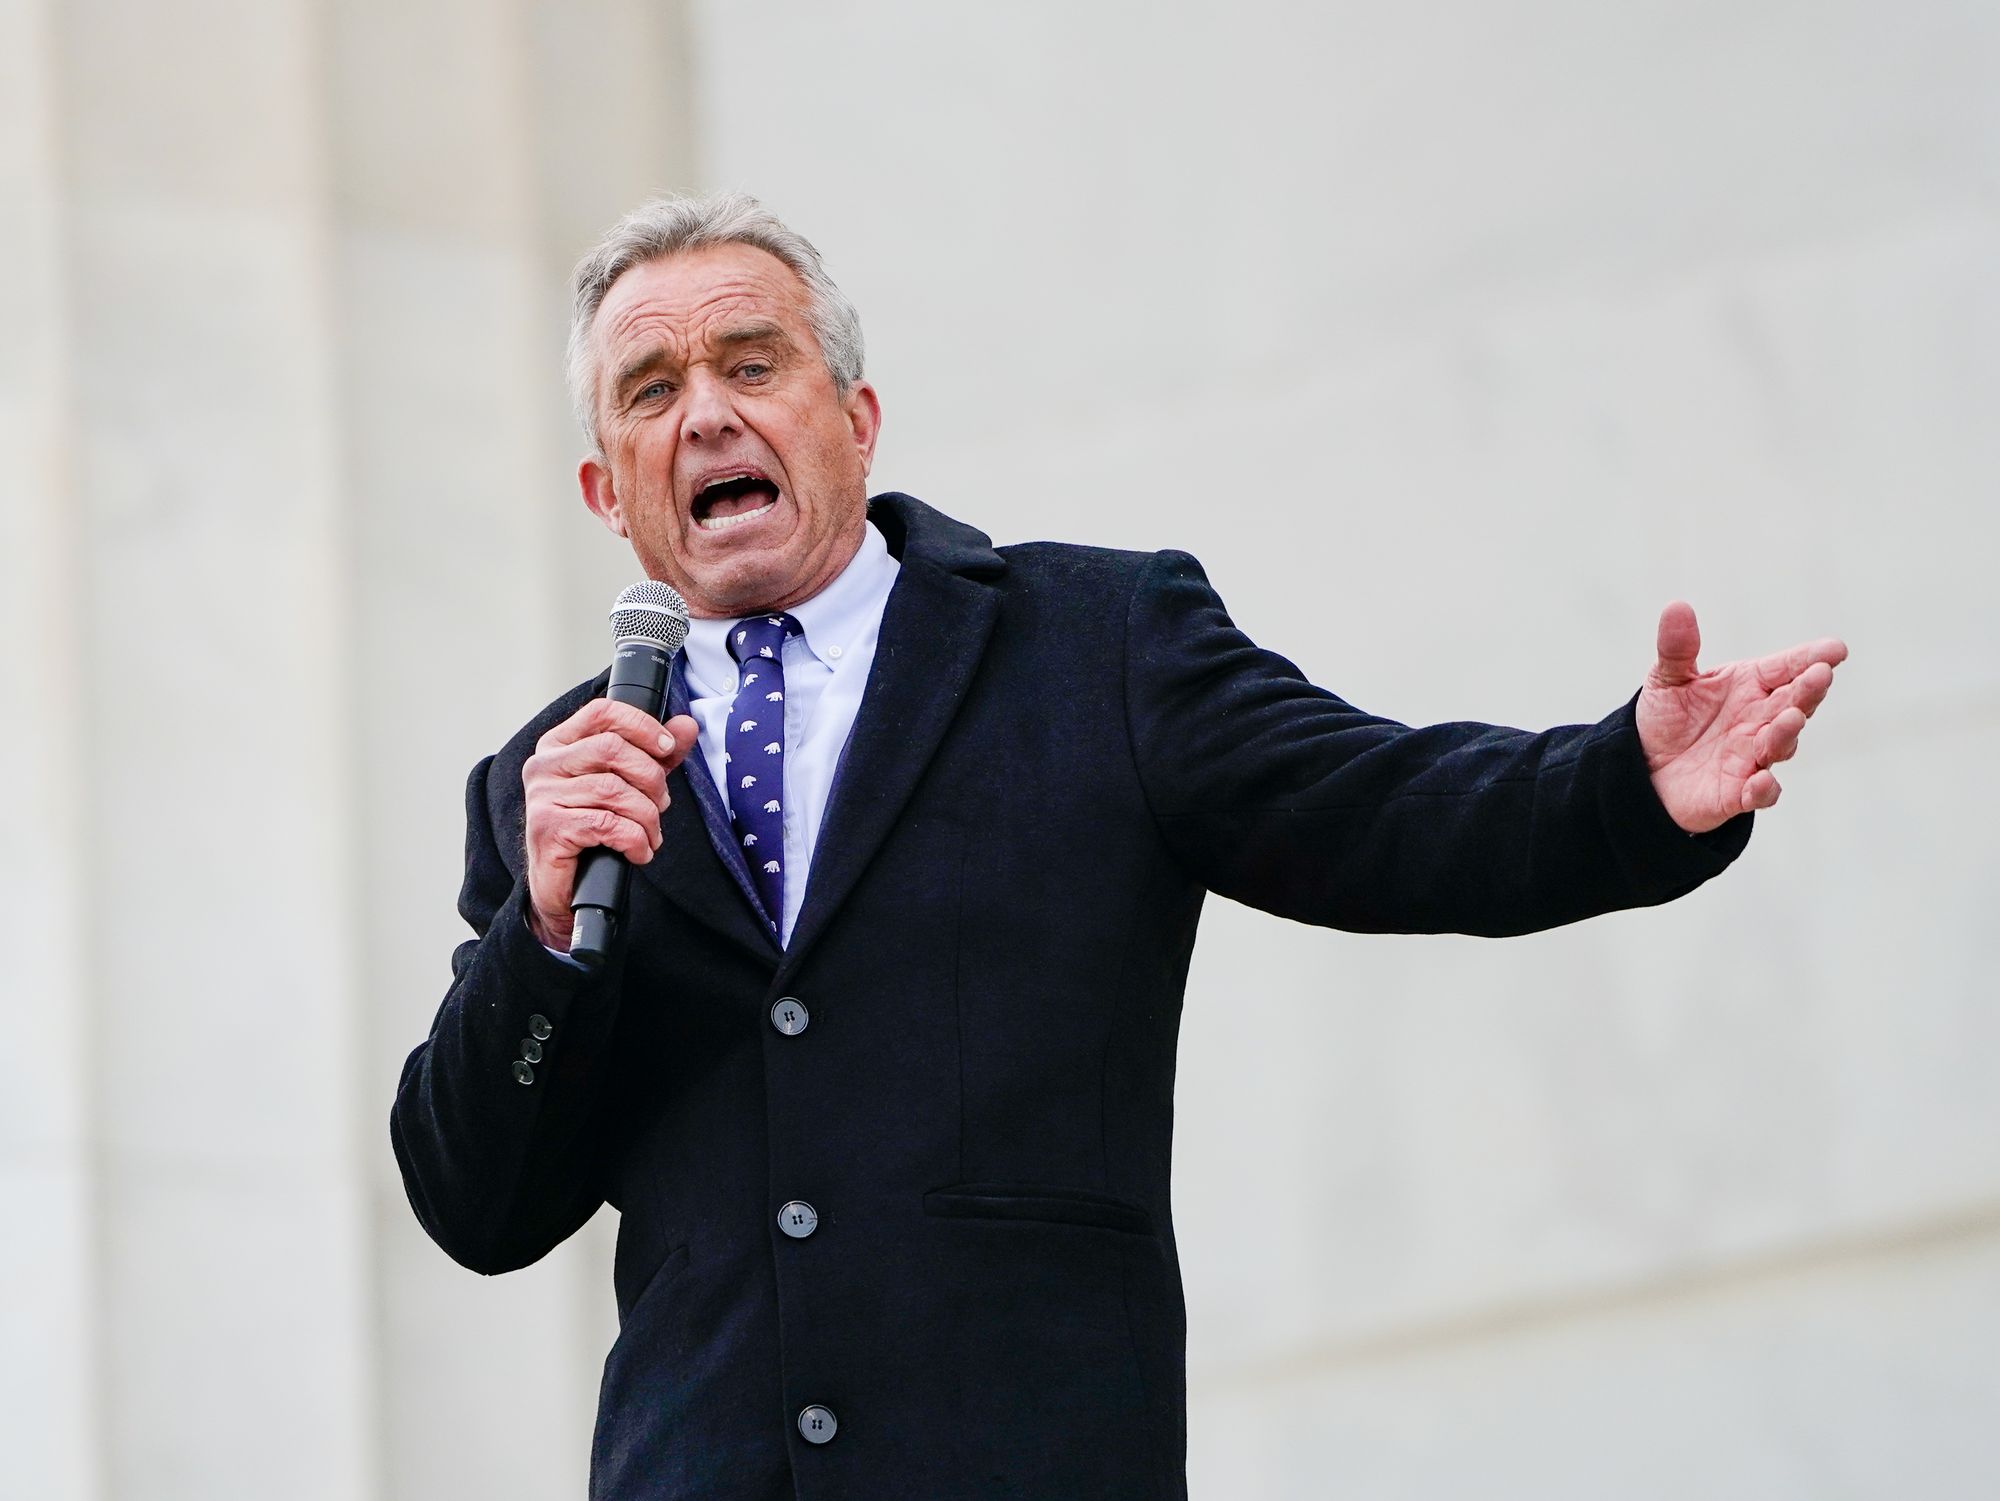 Robert F. Kennedy Jr. speaks at a rally protesting vaccine mandates on the National Mall in Washington in 2022. File Photo by Jemal Countess/UPI